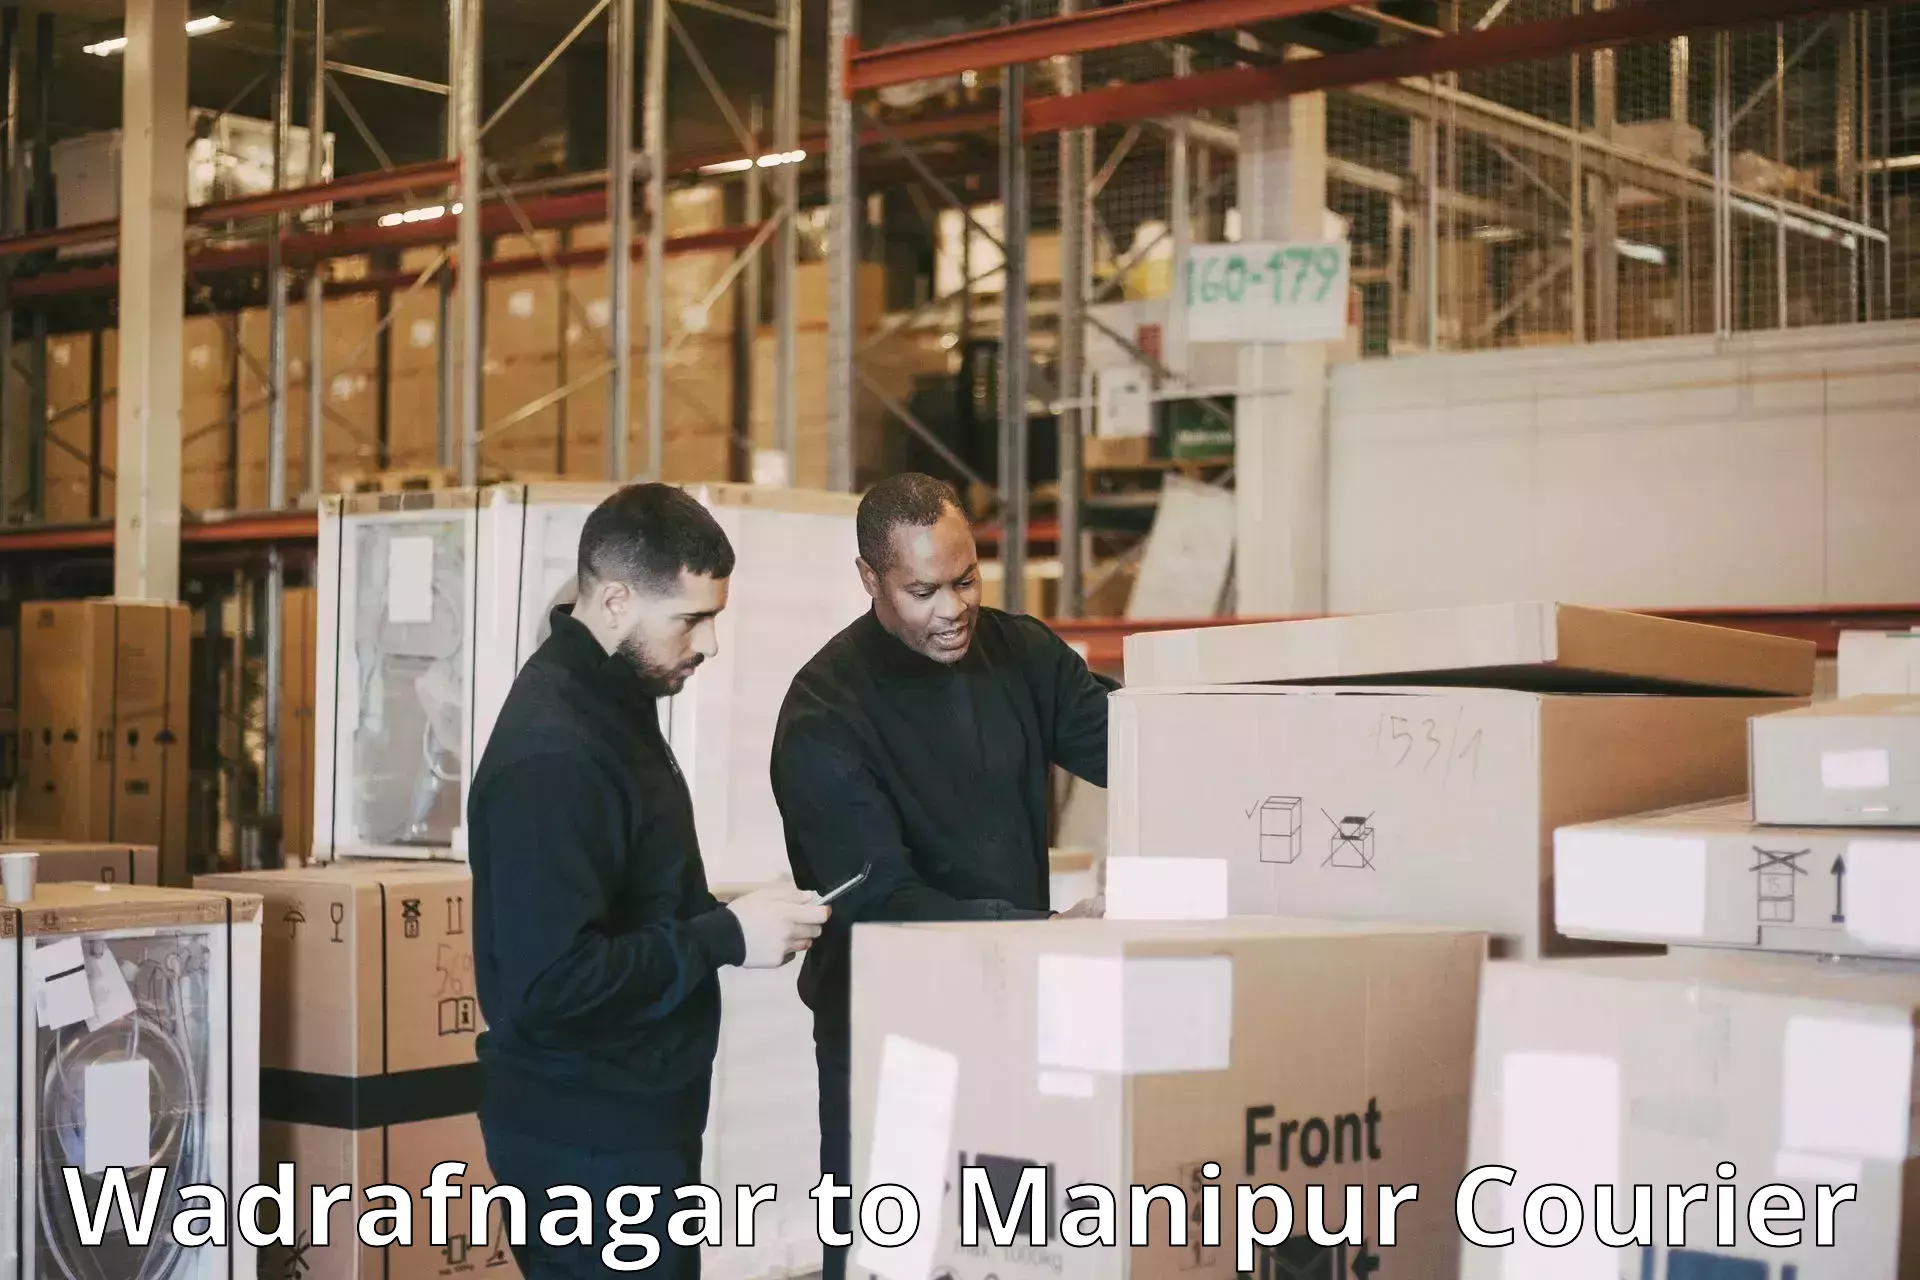 Small business couriers Wadrafnagar to Manipur